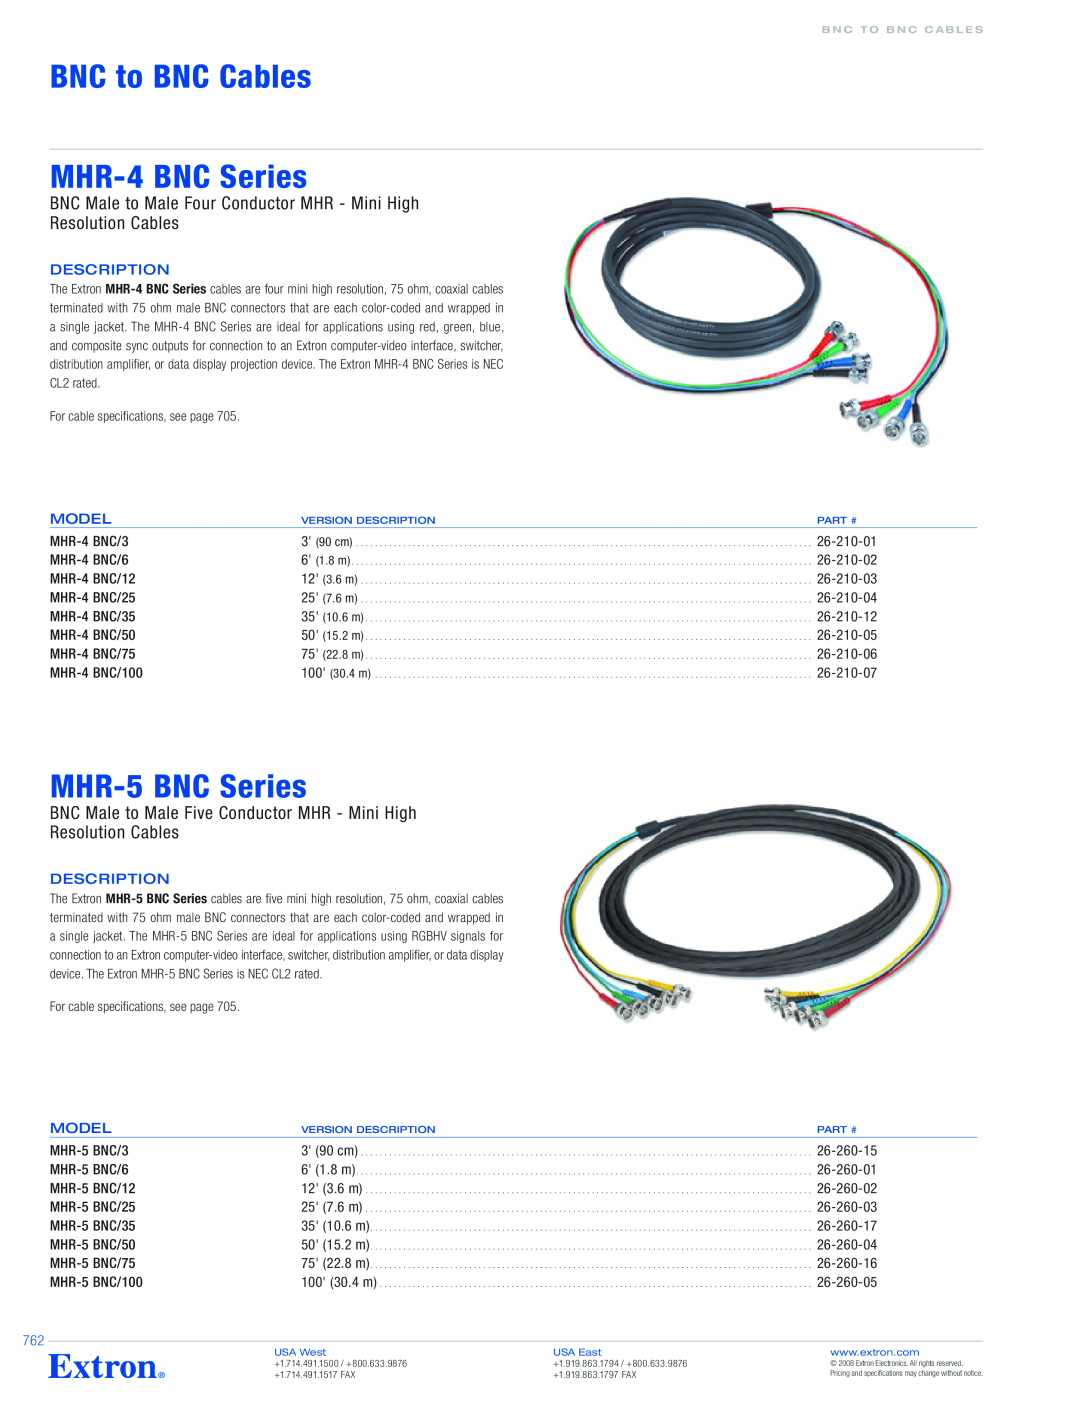 Extron electronic MHR-4 BNC/75 specifications BNC to BNC Cables MHR-4BNC Series, MHR-5BNC Series, Resolution Cables, Model 